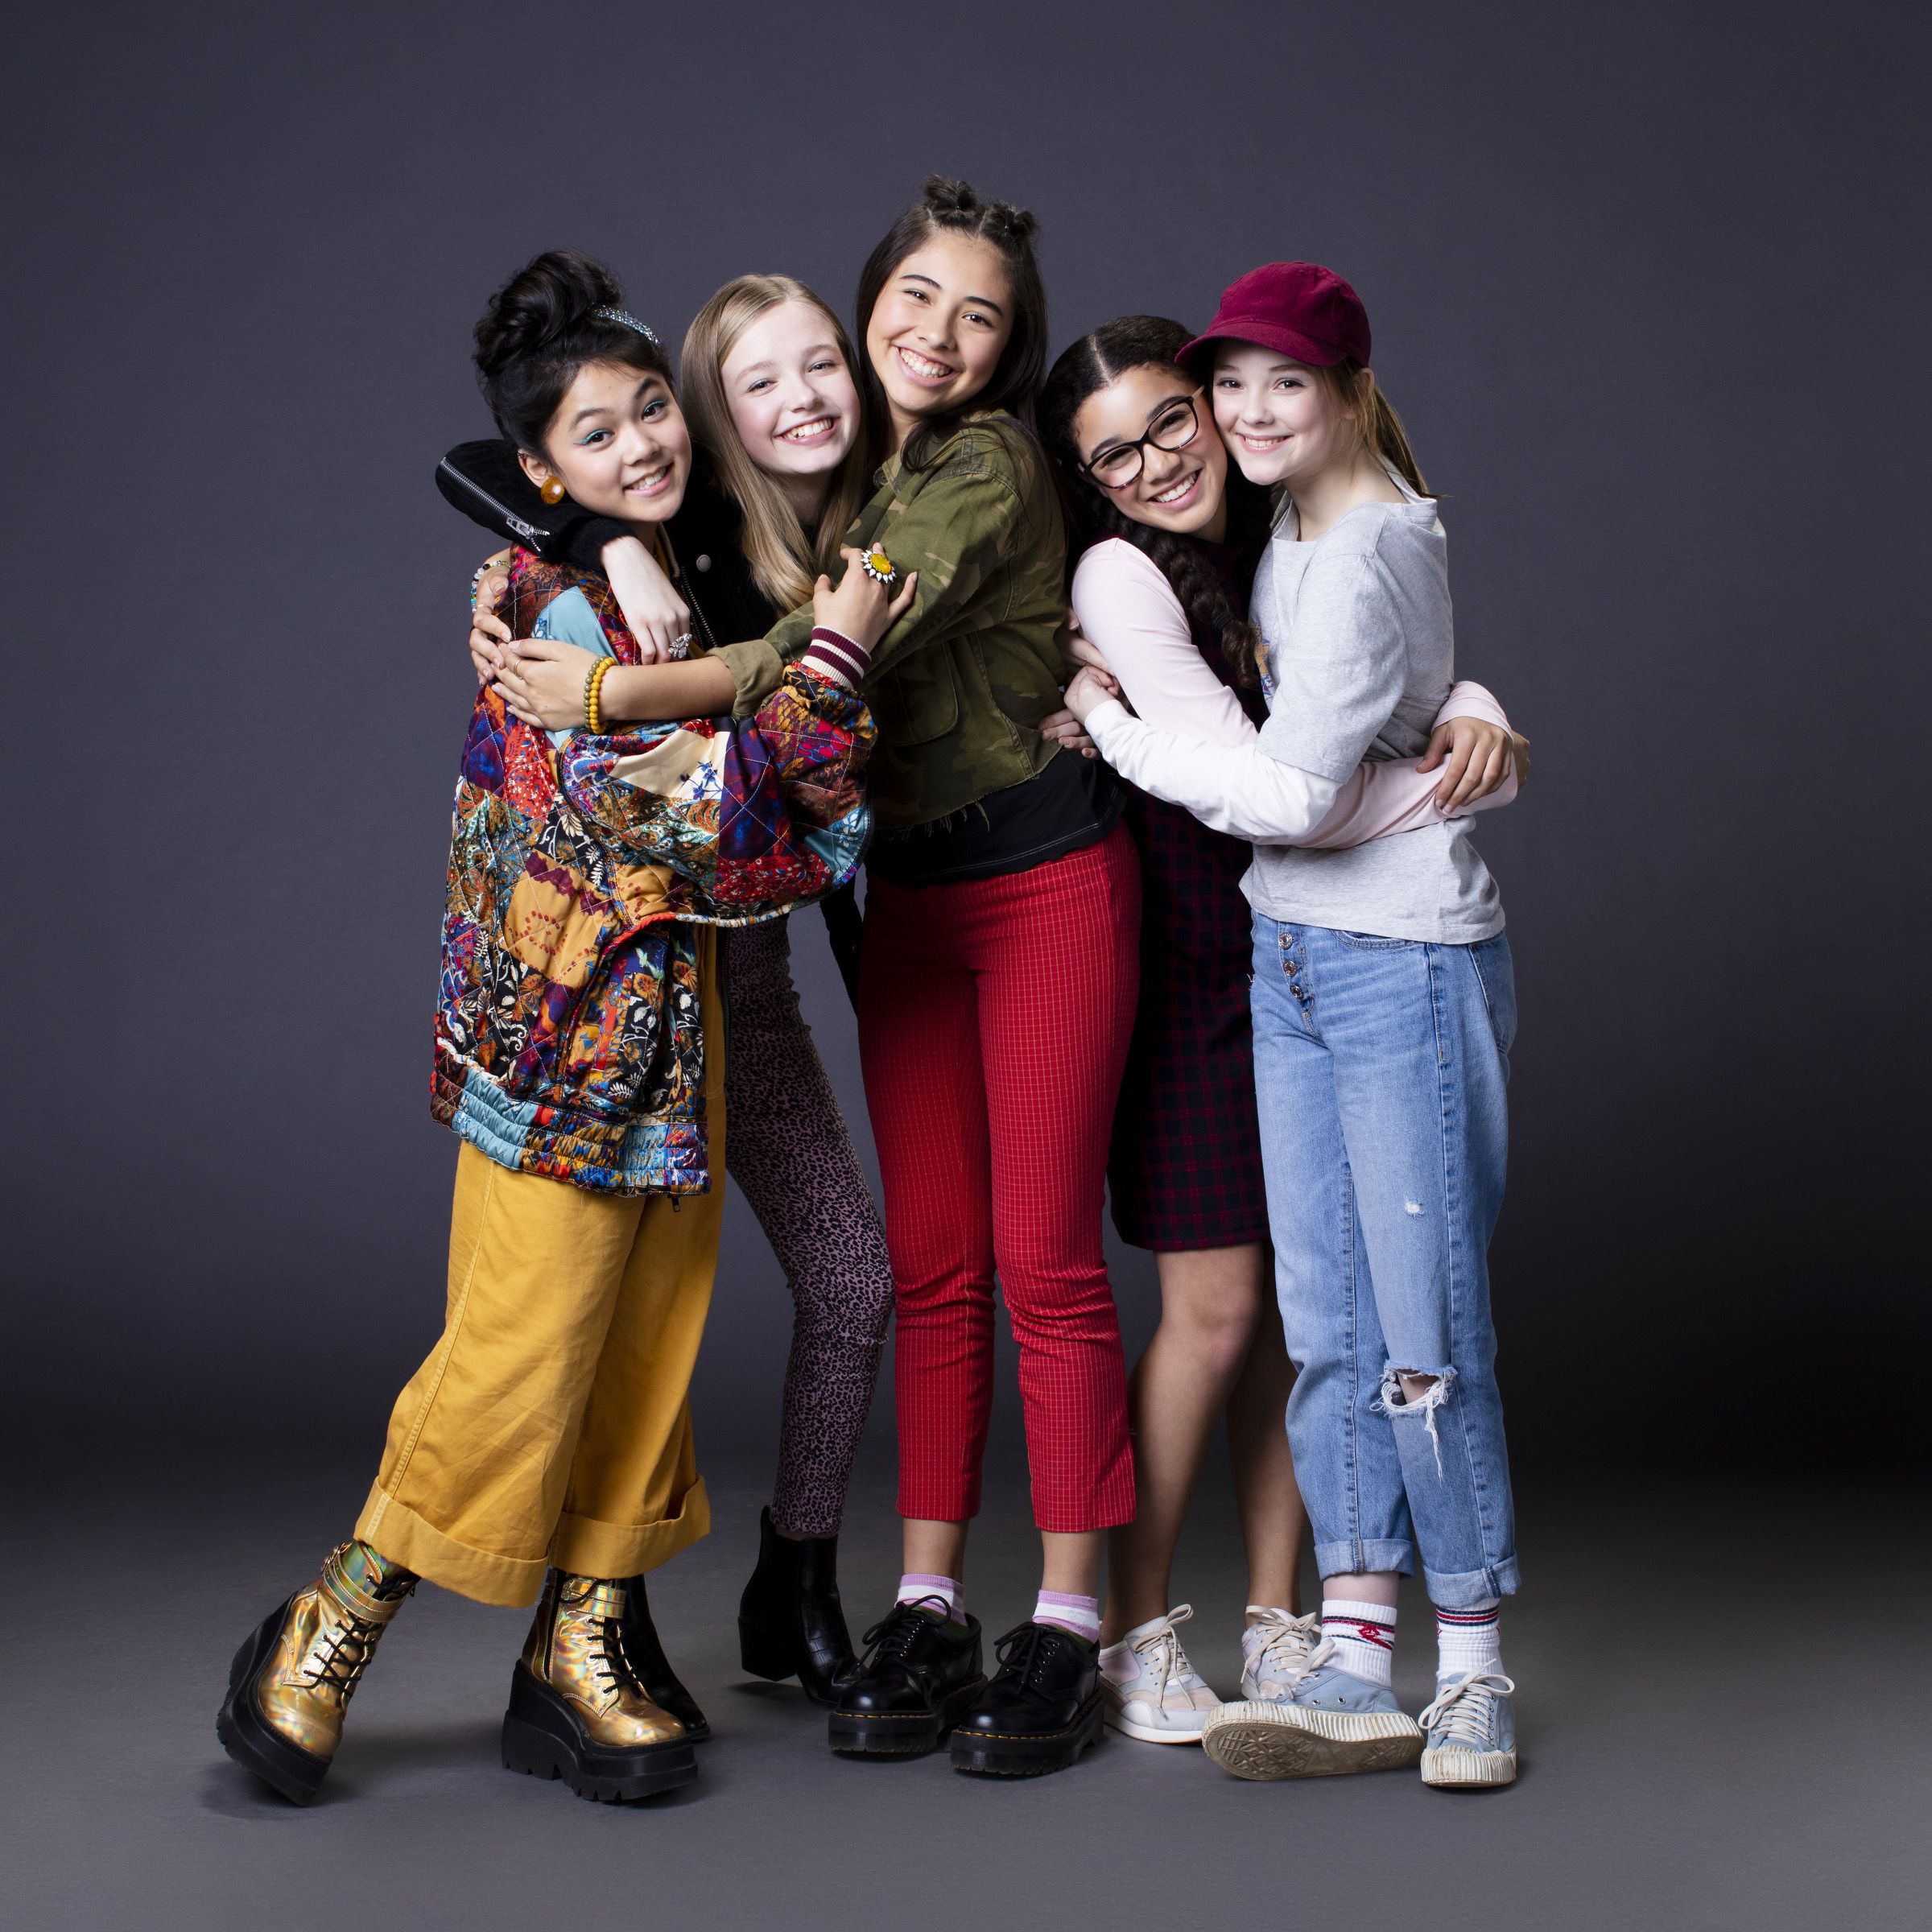 Baby-Sitters Club Director on Reinventing the Series, Possible Season 2 photo